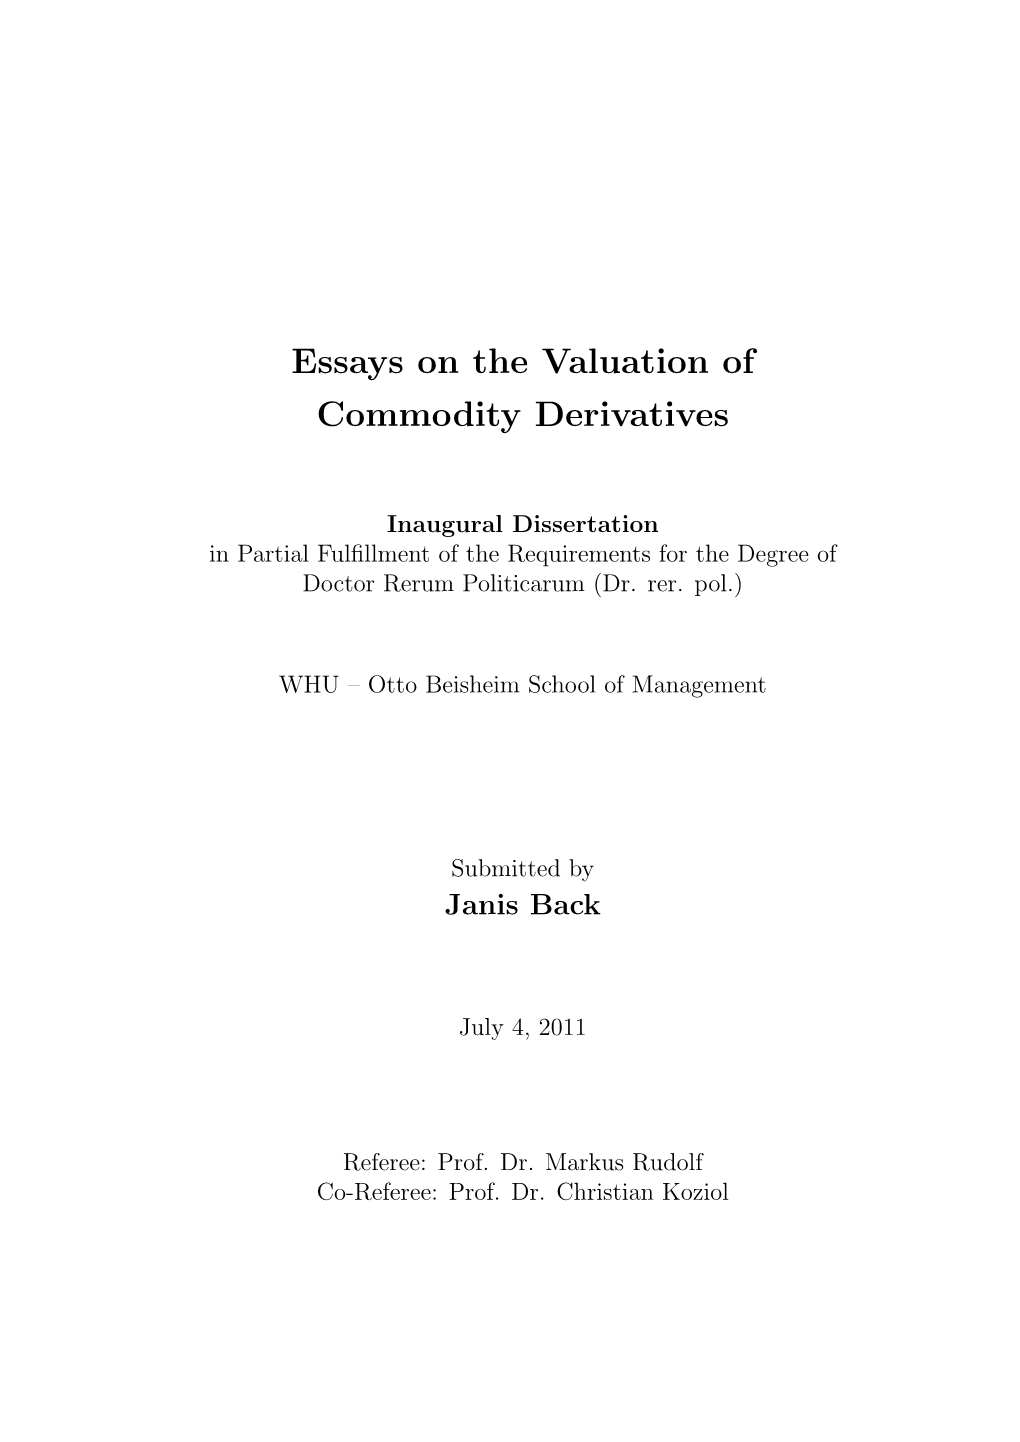 Essays on the Valuation of Commodity Derivatives